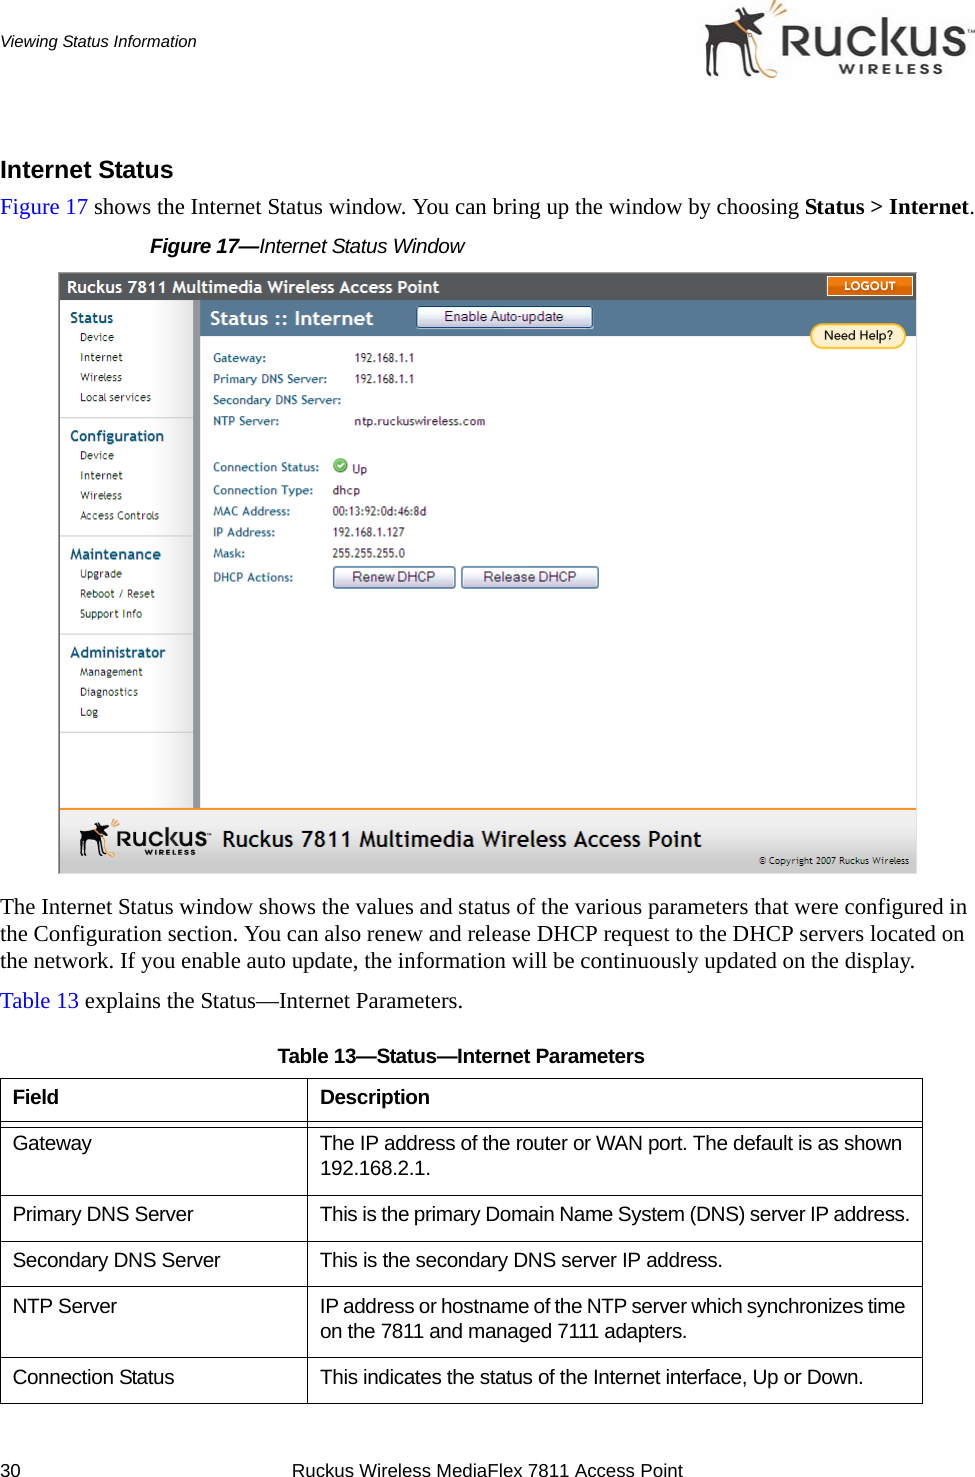 30 Ruckus Wireless MediaFlex 7811 Access PointViewing Status InformationInternet StatusFigure 17 shows the Internet Status window. You can bring up the window by choosing Status &gt; Internet.Figure 17—Internet Status WindowThe Internet Status window shows the values and status of the various parameters that were configured in the Configuration section. You can also renew and release DHCP request to the DHCP servers located on the network. If you enable auto update, the information will be continuously updated on the display.Table 13 explains the Status—Internet Parameters.Table 13—Status—Internet ParametersField DescriptionGateway The IP address of the router or WAN port. The default is as shown 192.168.2.1.Primary DNS Server This is the primary Domain Name System (DNS) server IP address.Secondary DNS Server This is the secondary DNS server IP address.NTP Server IP address or hostname of the NTP server which synchronizes time on the 7811 and managed 7111 adapters.Connection Status This indicates the status of the Internet interface, Up or Down.